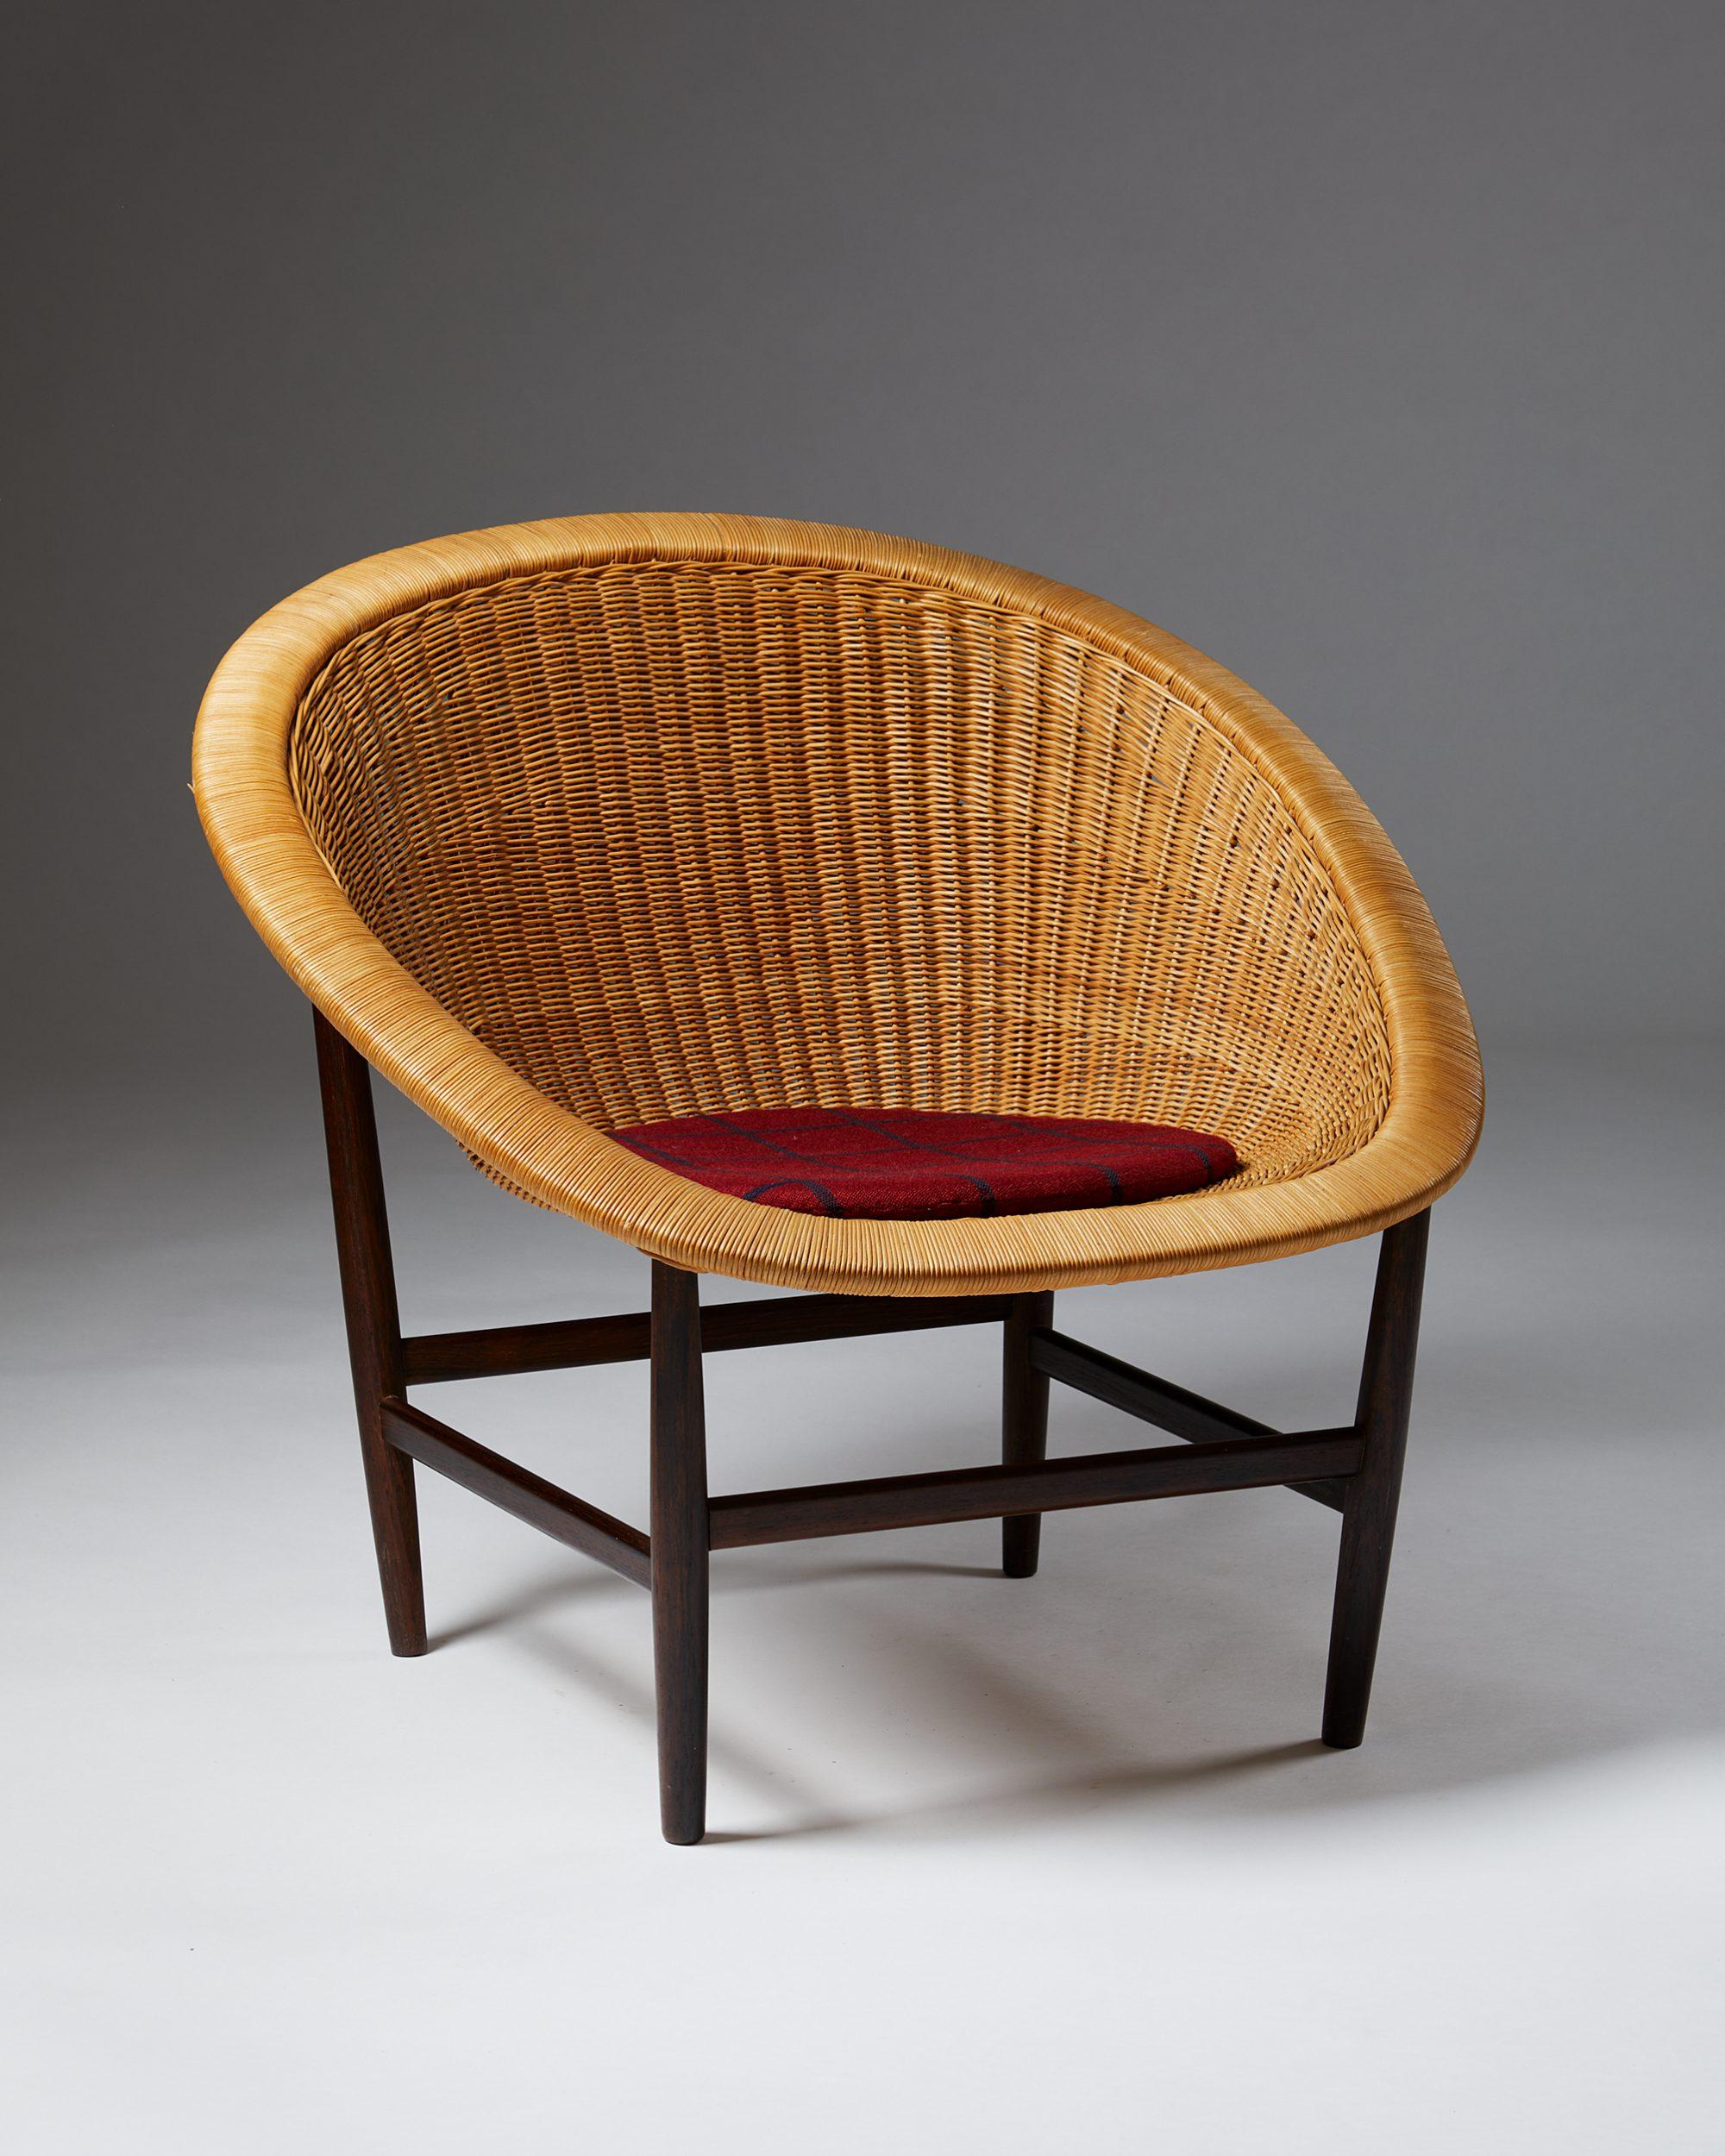 Easy chair designed by Nanna Ditzel for Ludvig Pontoppidan,
Denmark, 1950s.

Exceptionally rare model with a Brazilian rosewood frame.
Woven cane, Brazilian rosewood, and wool cushion.

Dimensions: 
H: 75 cm/ 2' 5 1/2